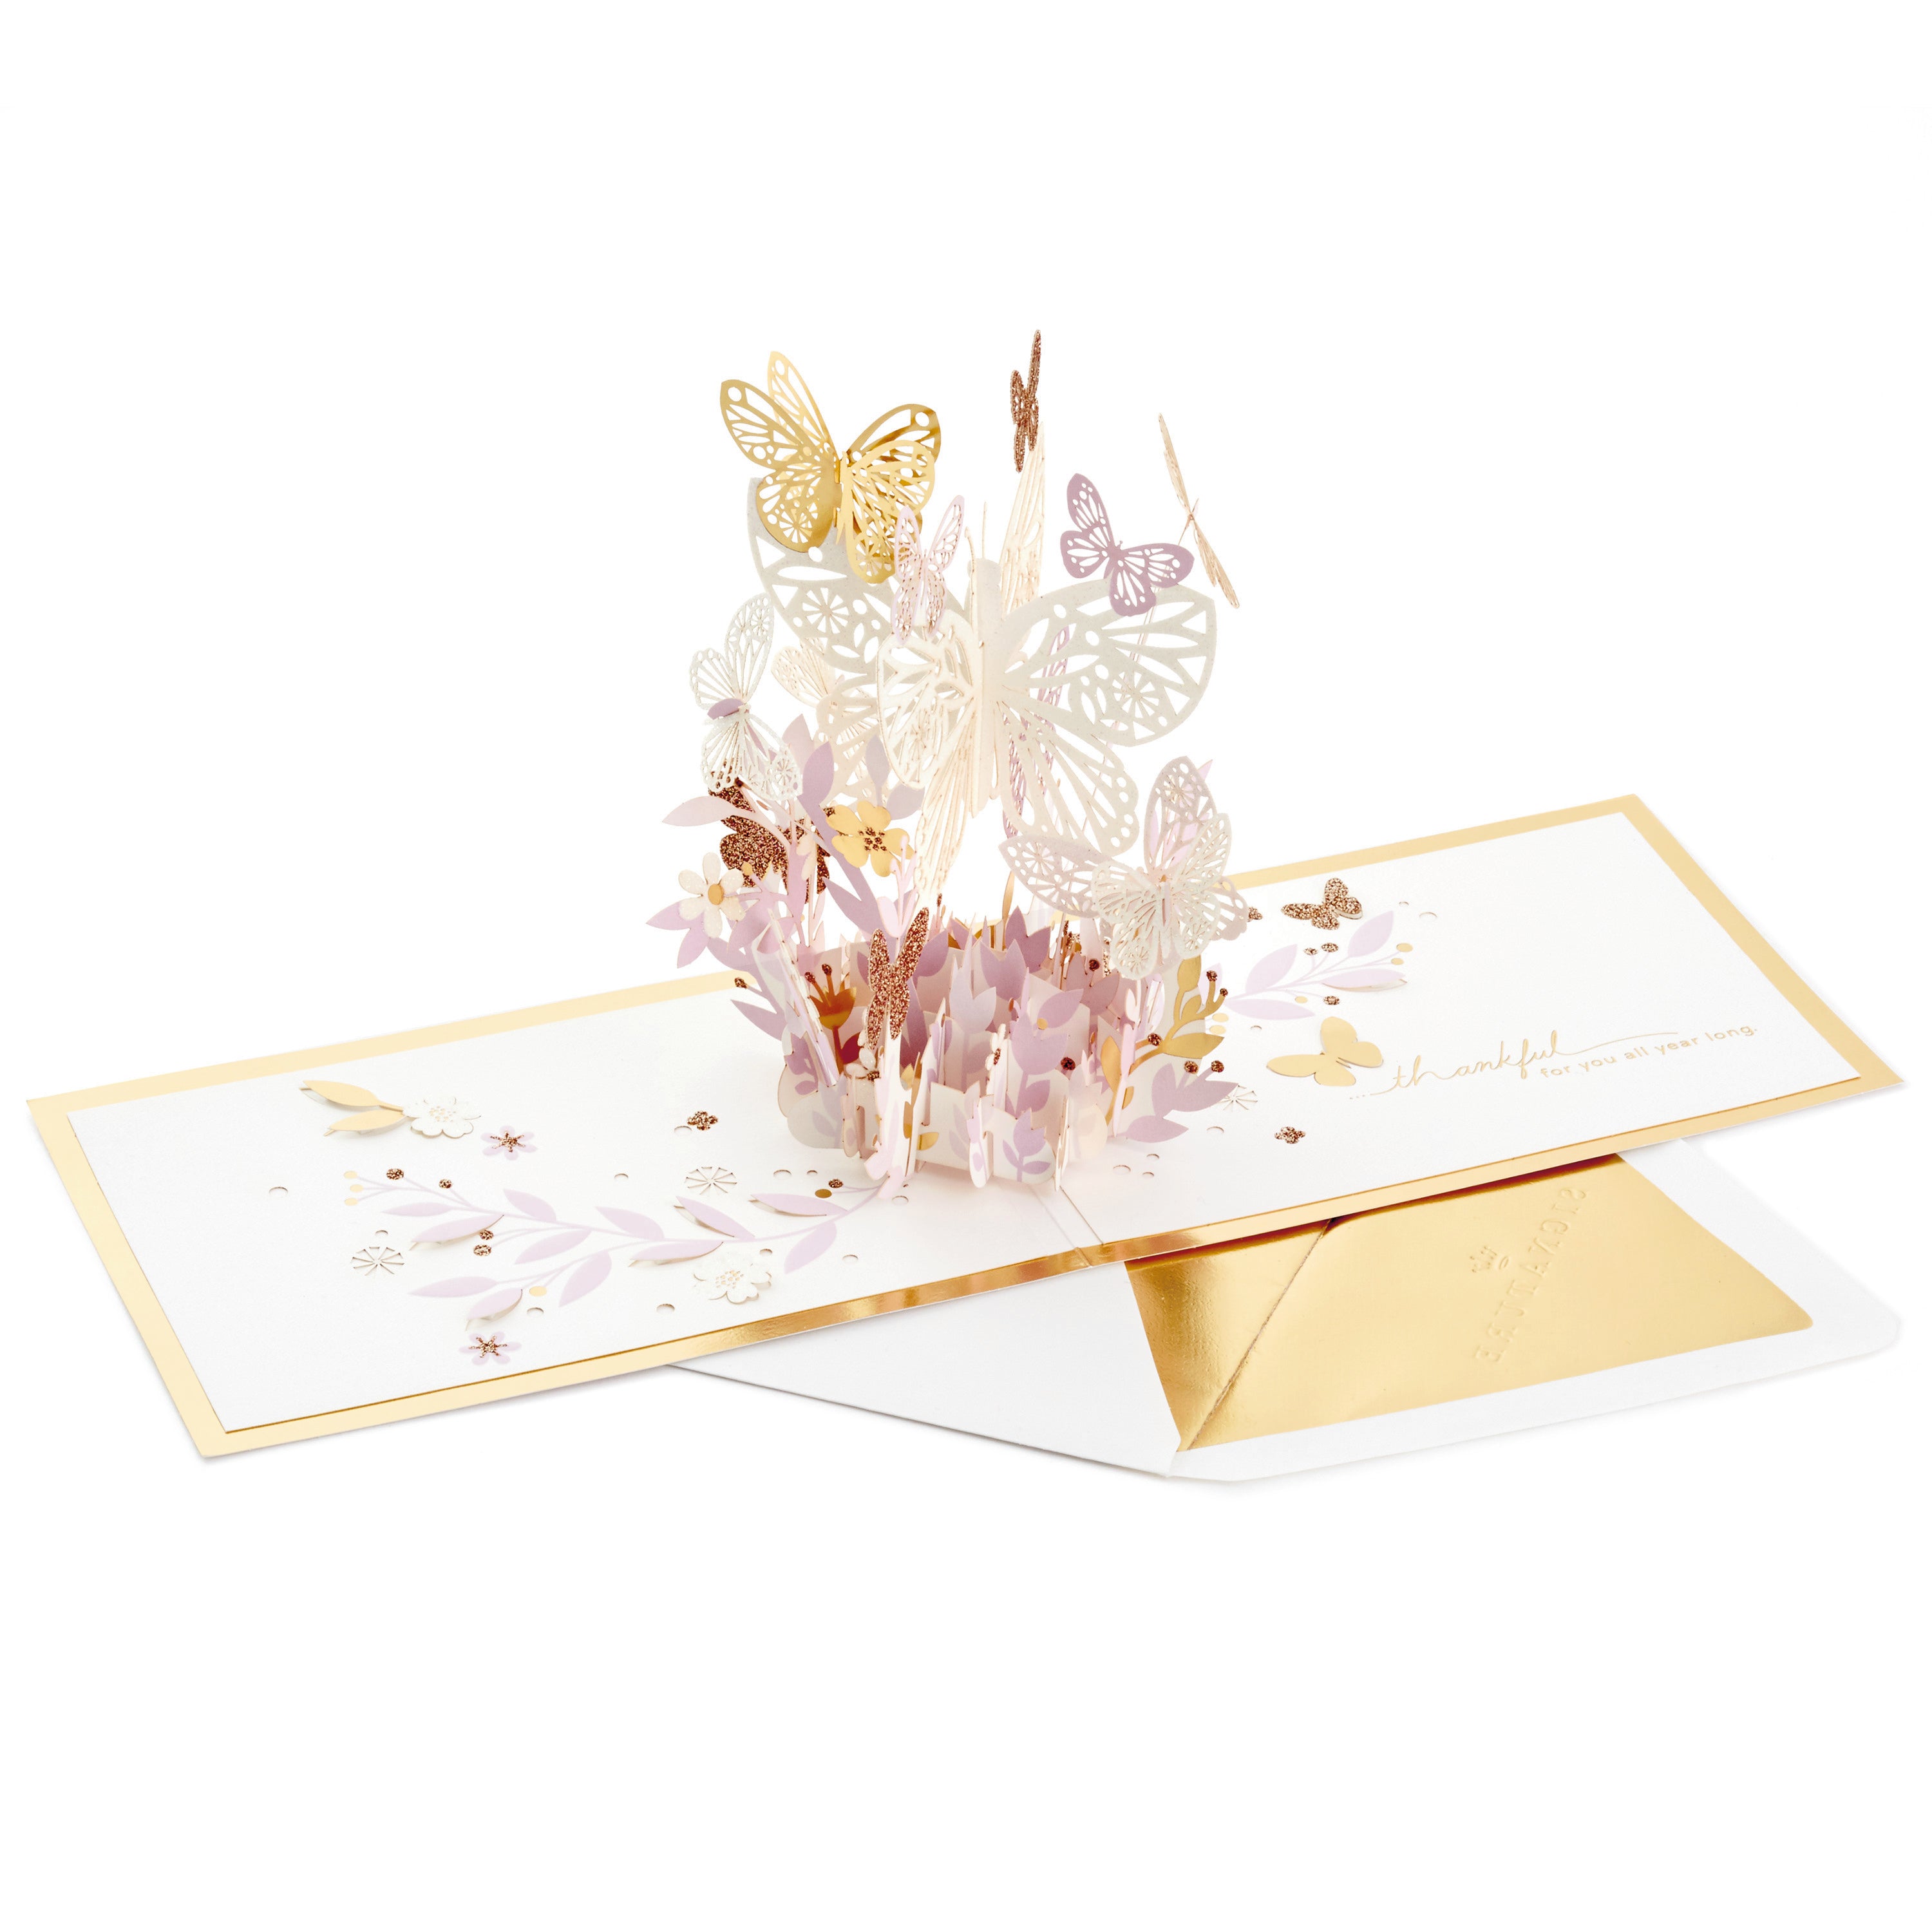 Signature Paper Wonder Pop Up Card, Thankful for You (Thinking of You Card or Birthday Card)